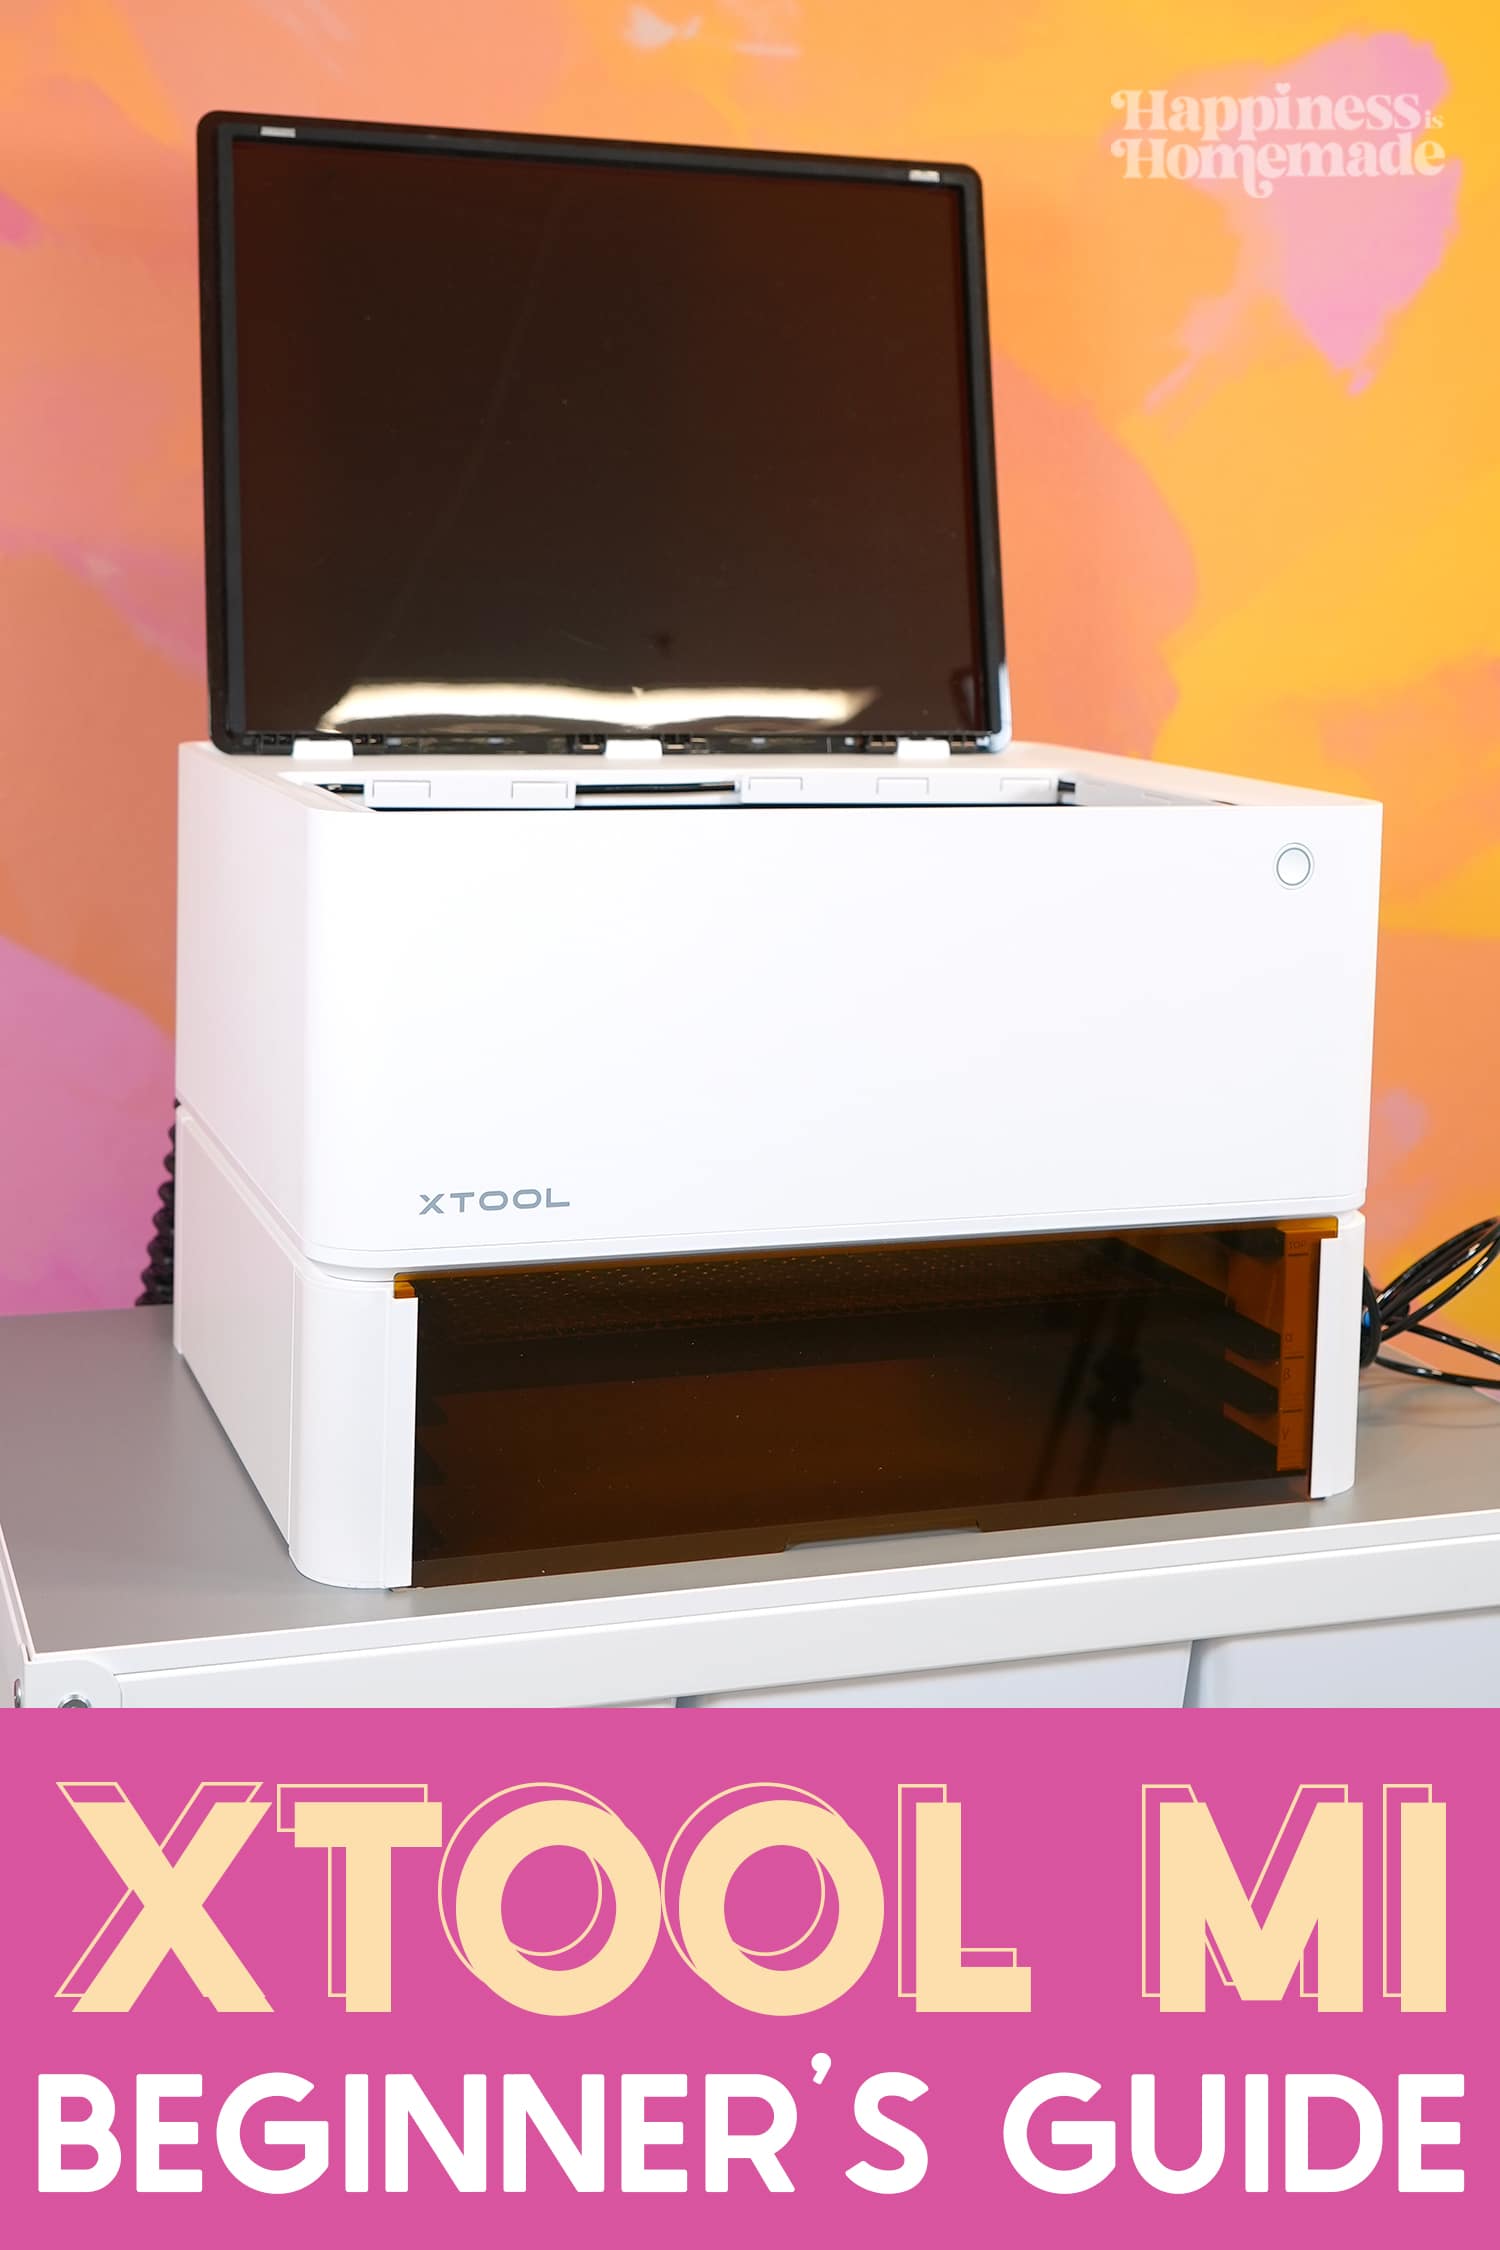 xTool M1 - Mini but Powerful Hybrid Laser & Blade Cutter by